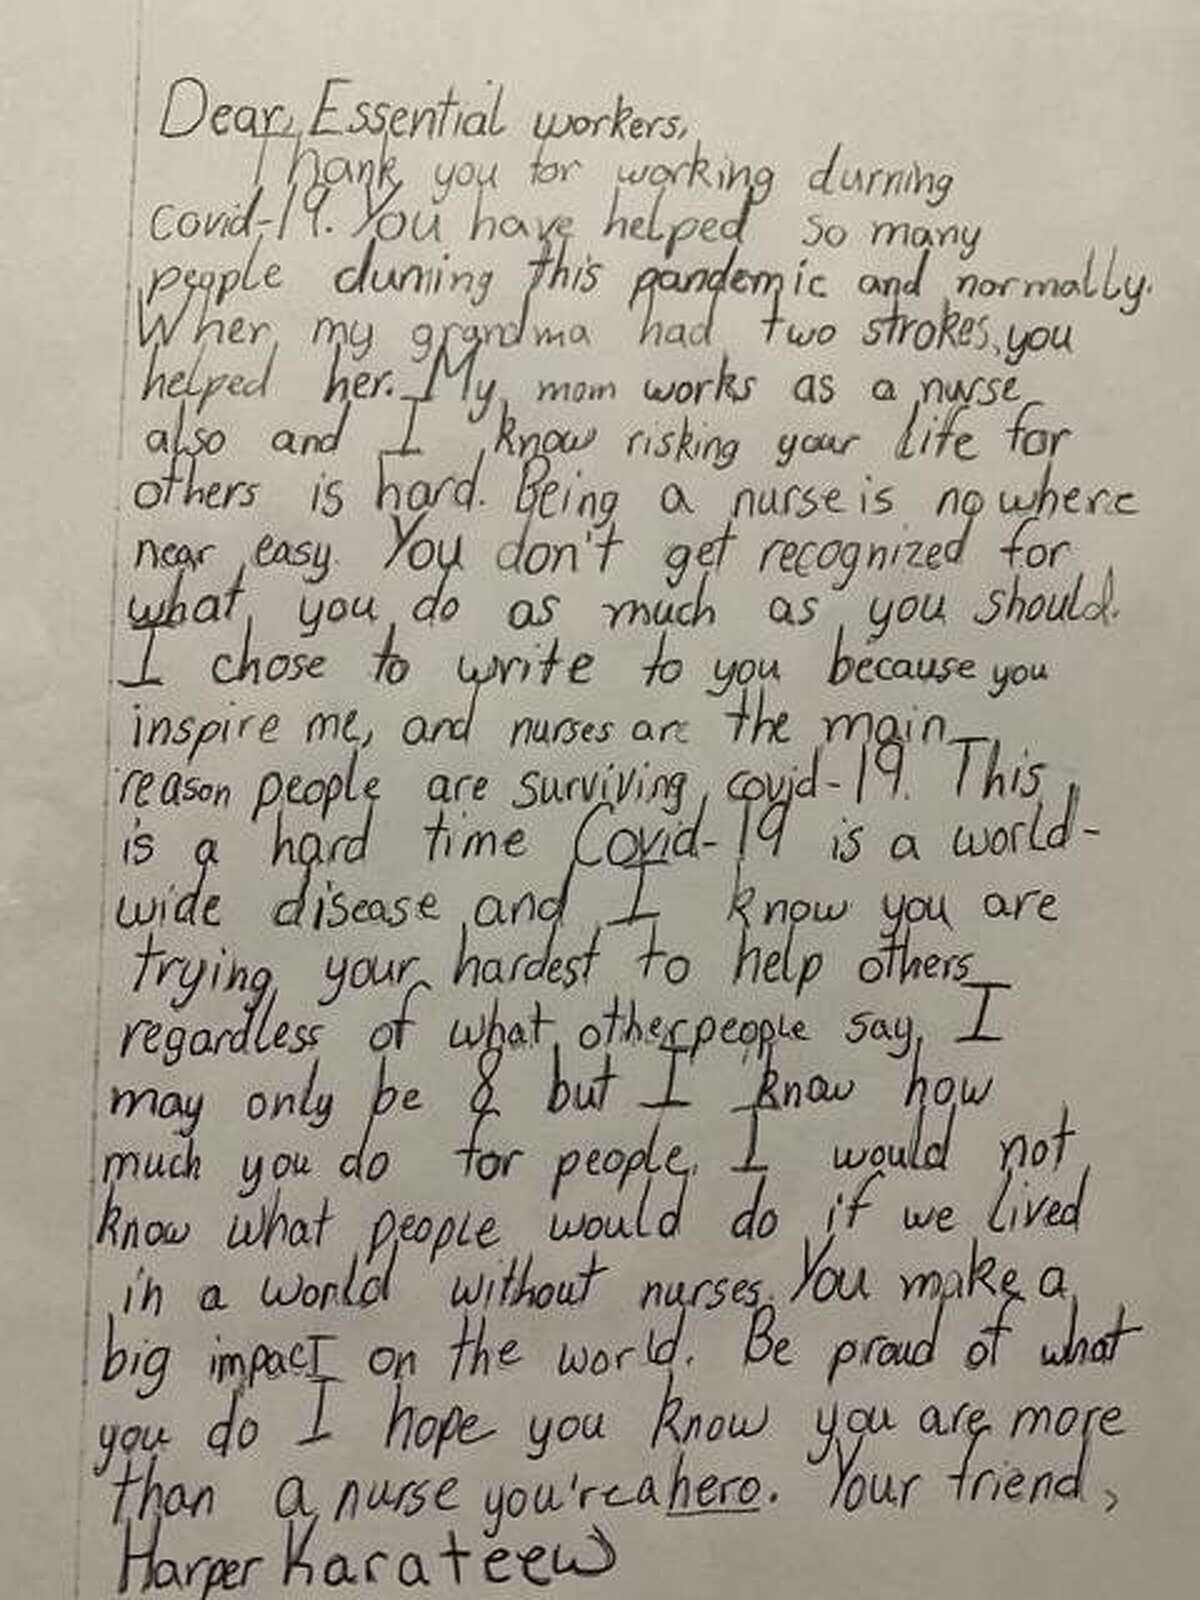 Eight-year-old Harper Karateew’s letter of thanks she wrote to essential workers at Anderson Hospital. Michael Rockwell, a third-grade teacher at Woodland Elementary School in Edwardsville, assigns the project to students in his classroom each year.